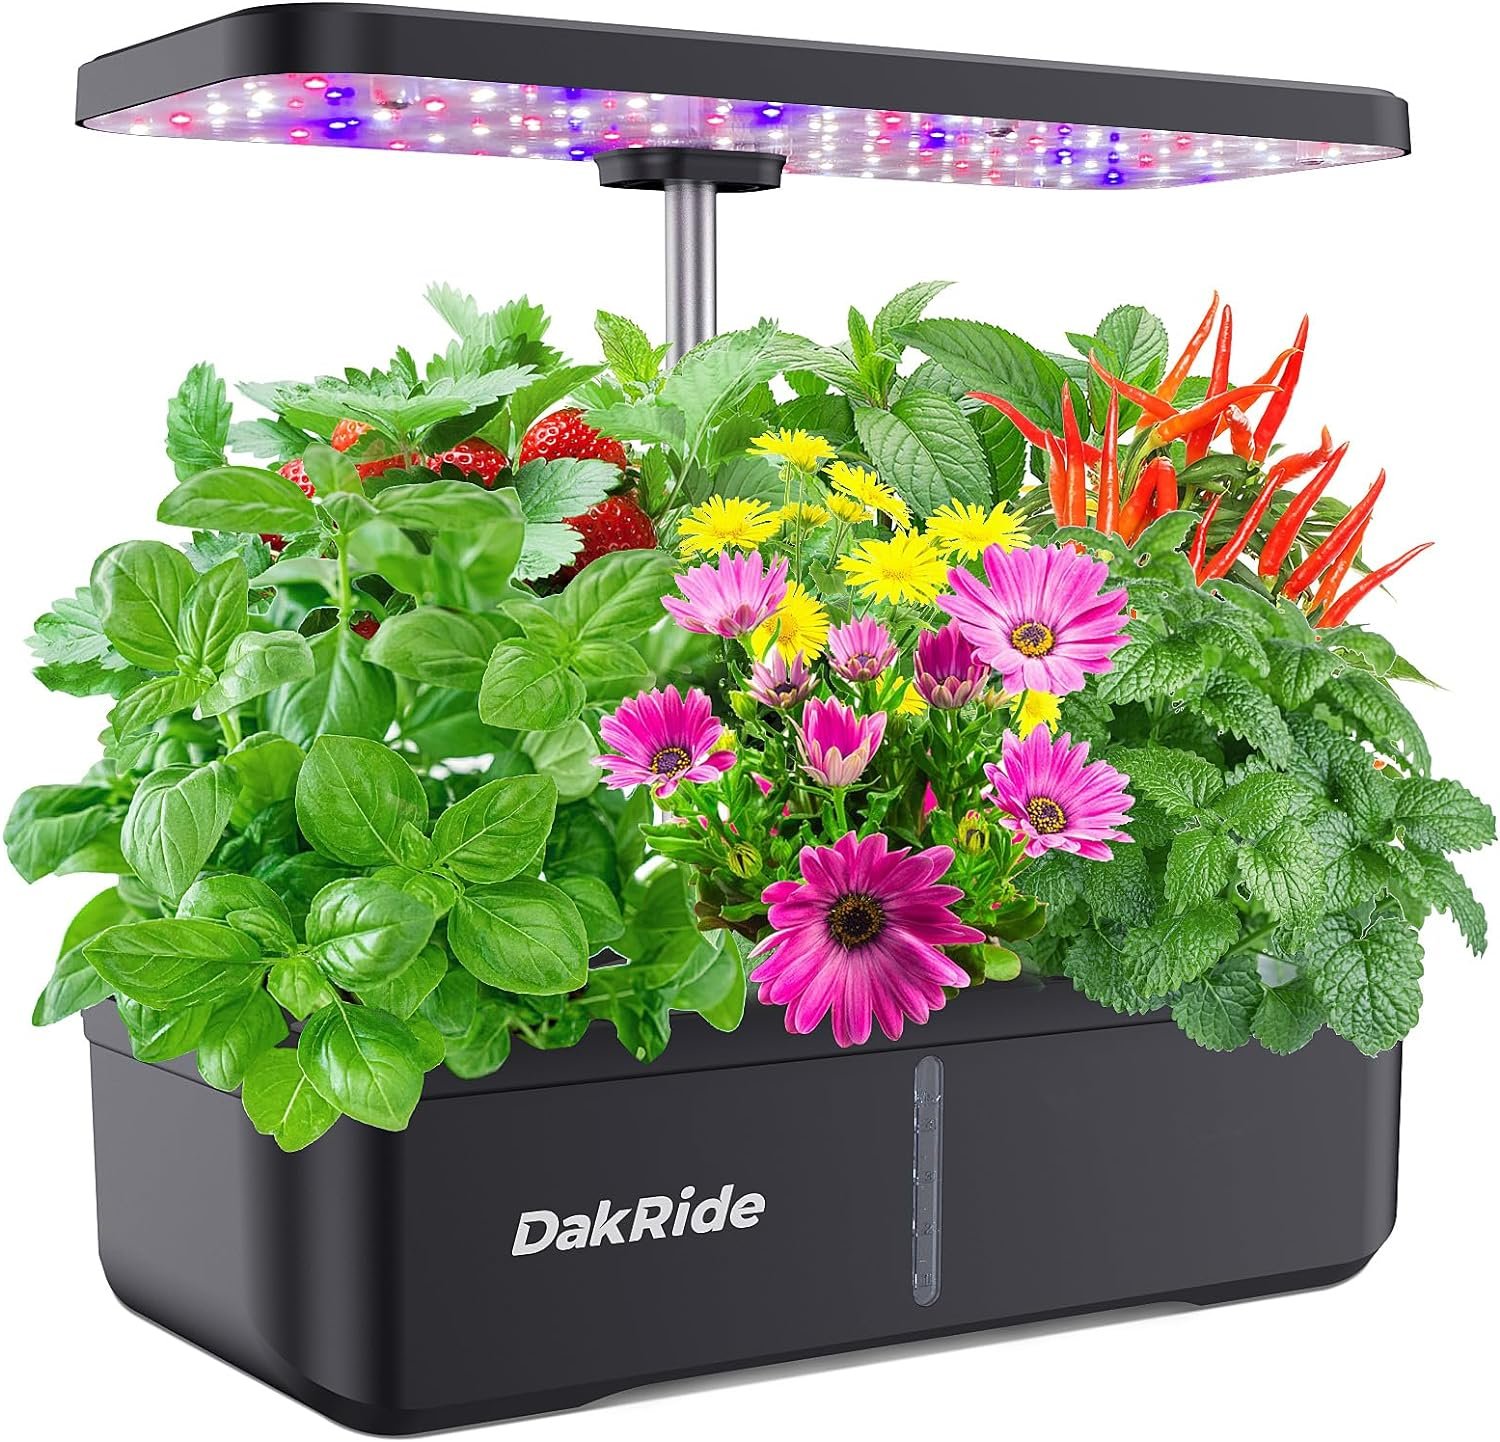 DakRide Hydroponics Growing System 12 Pods, Indoor Garden System with 36W Full Spectrum LED Grow Light, Auto-Timer, Adjustable Height, Silent Pump System, Indoor Herb Garden Kit for Home Office